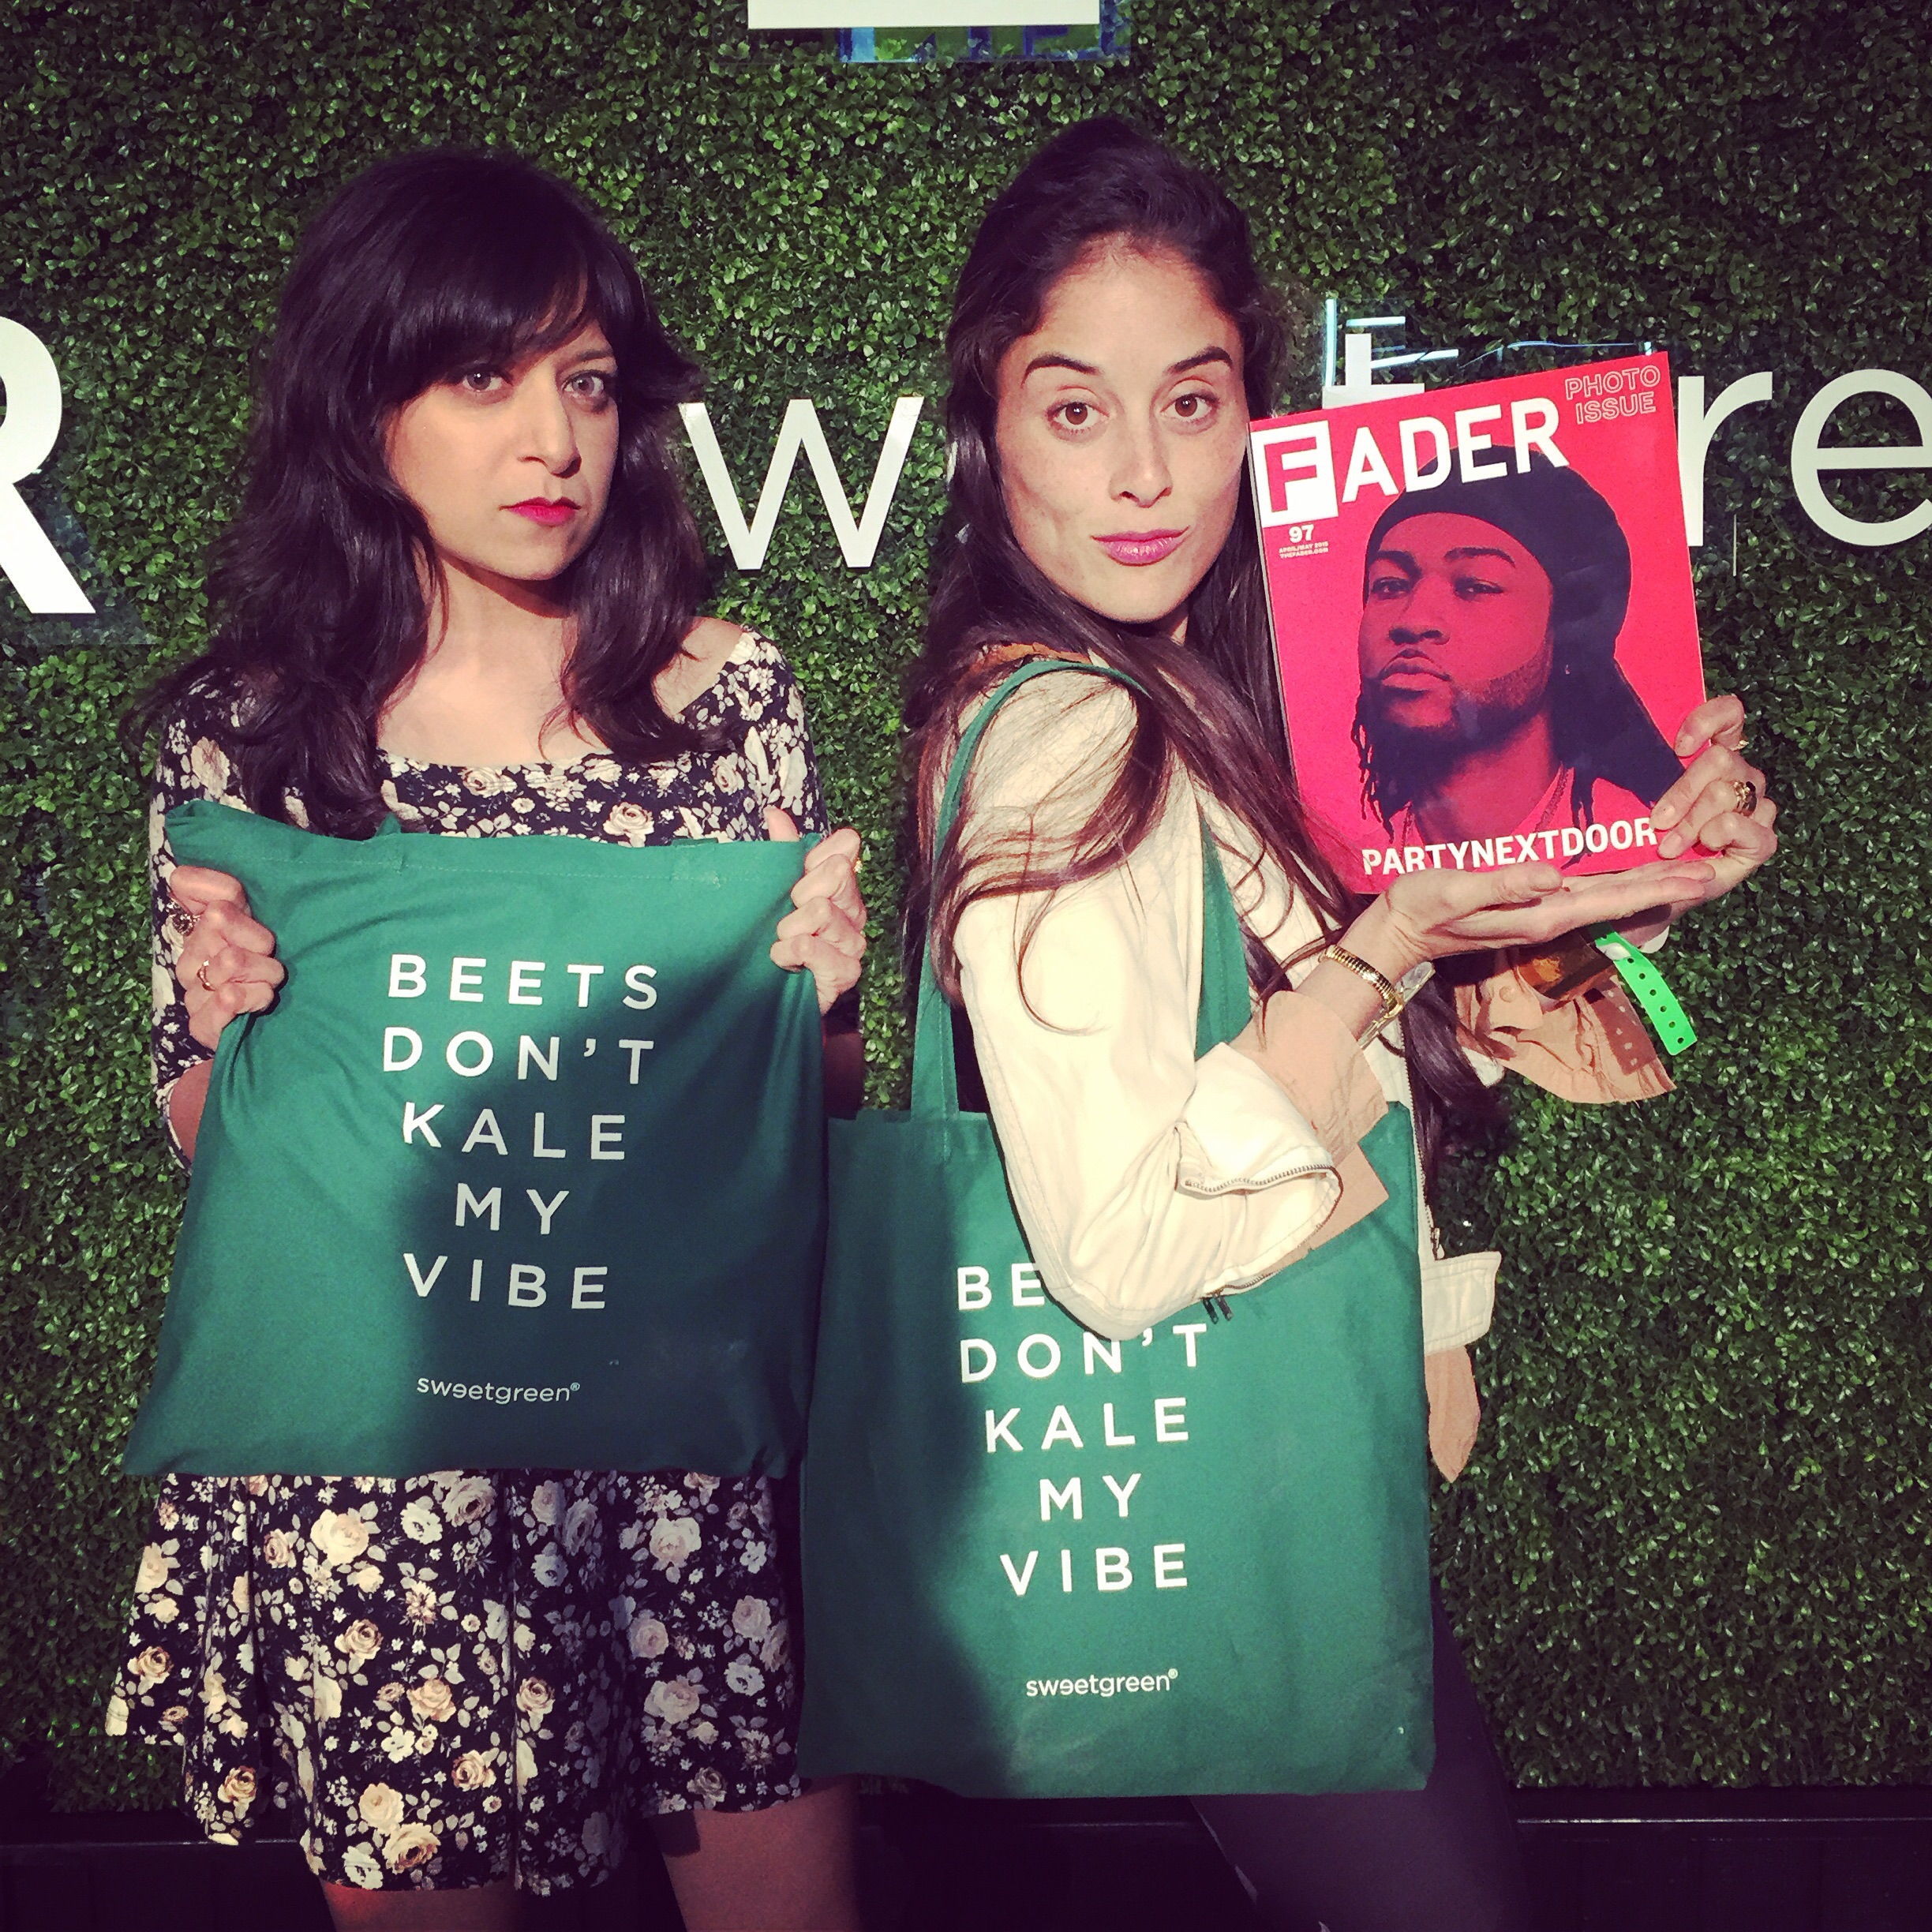 Sonal Shah and Alyson Granaderos attend opening night at Sweetgreen